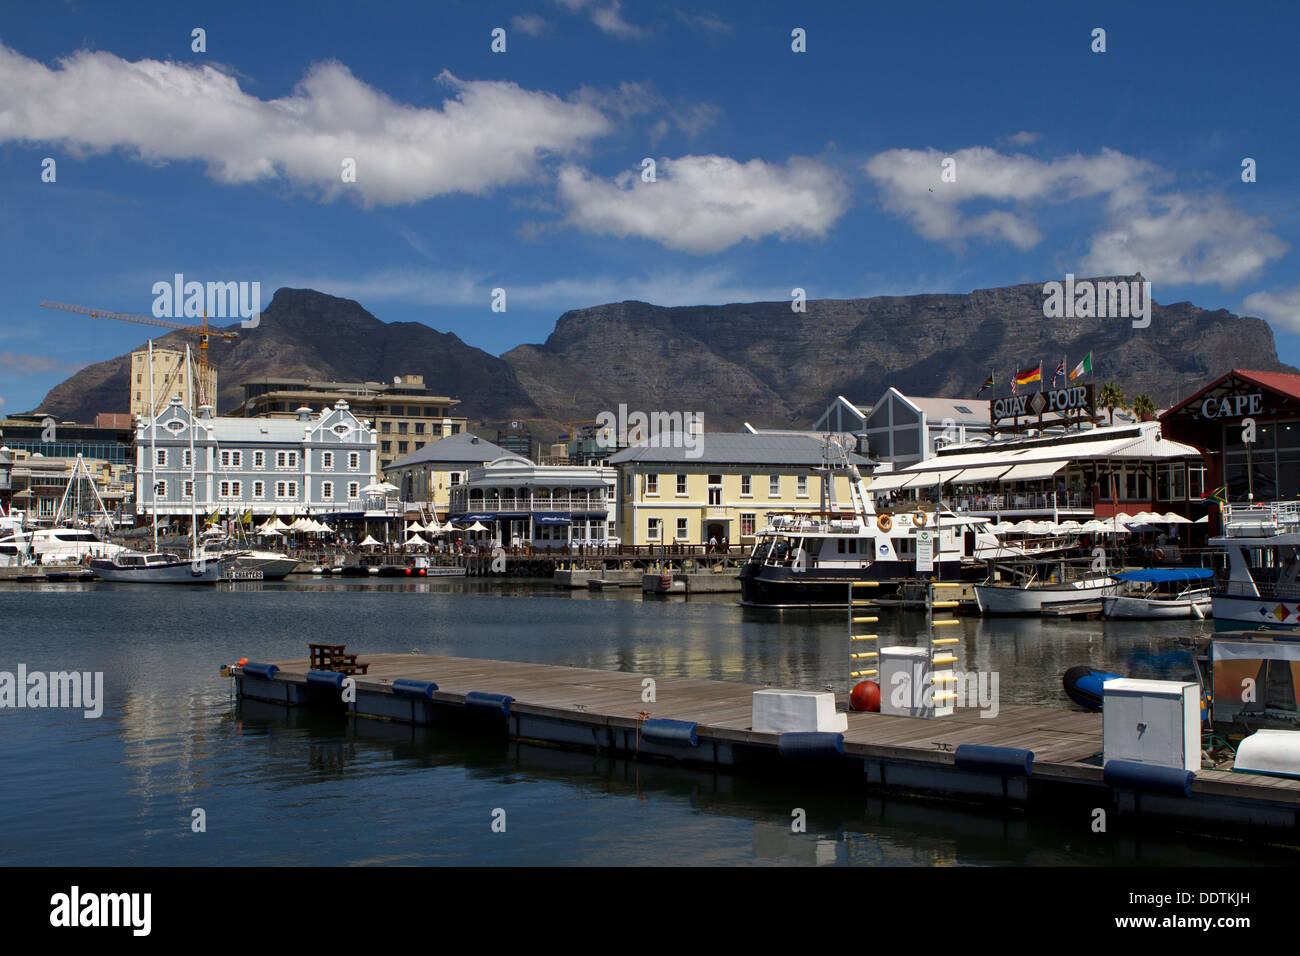 Victoria & Alfred Waterfront, Cape Town, South Africa. Stock Photo